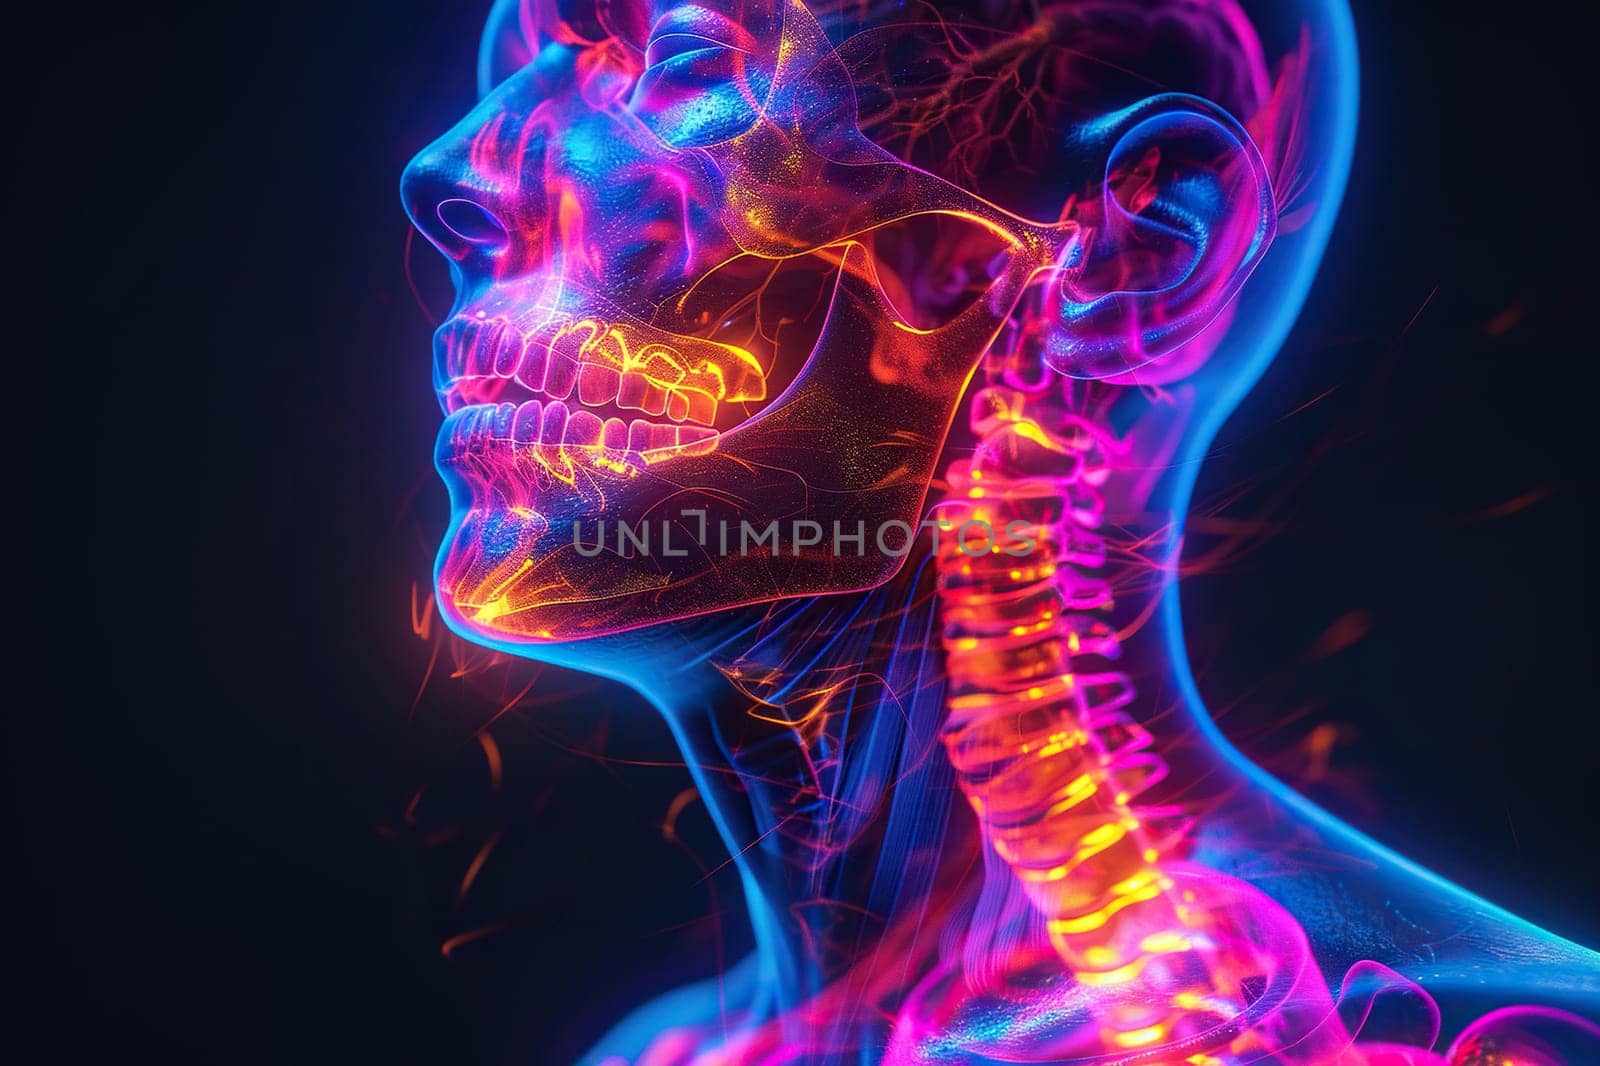 Image of a human skull and neck on a dark background with smoke and neon light.